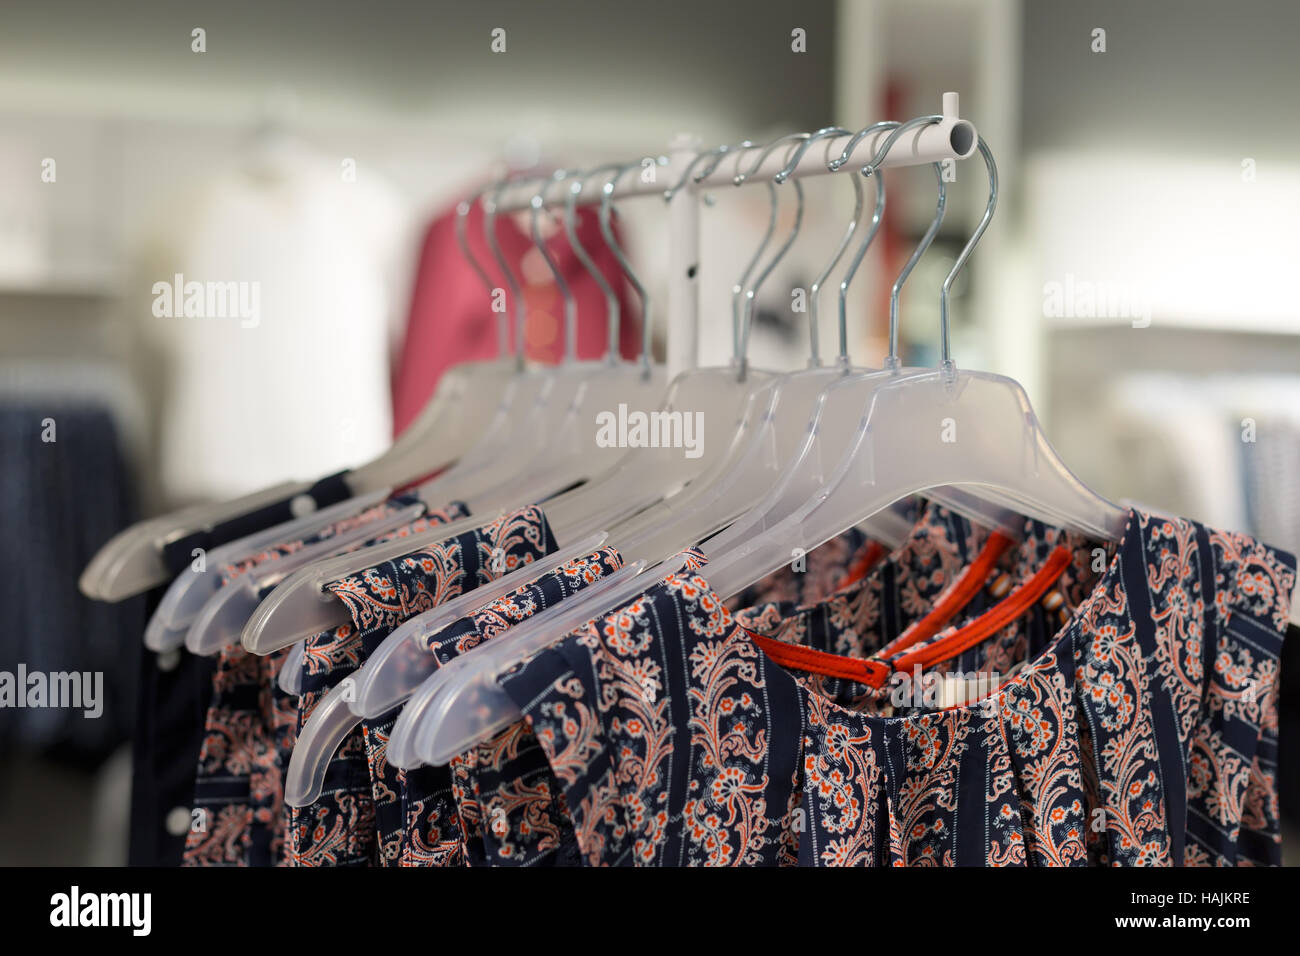 56,867 Women Clothing Store Stock Photos - Free & Royalty-Free Stock Photos  from Dreamstime